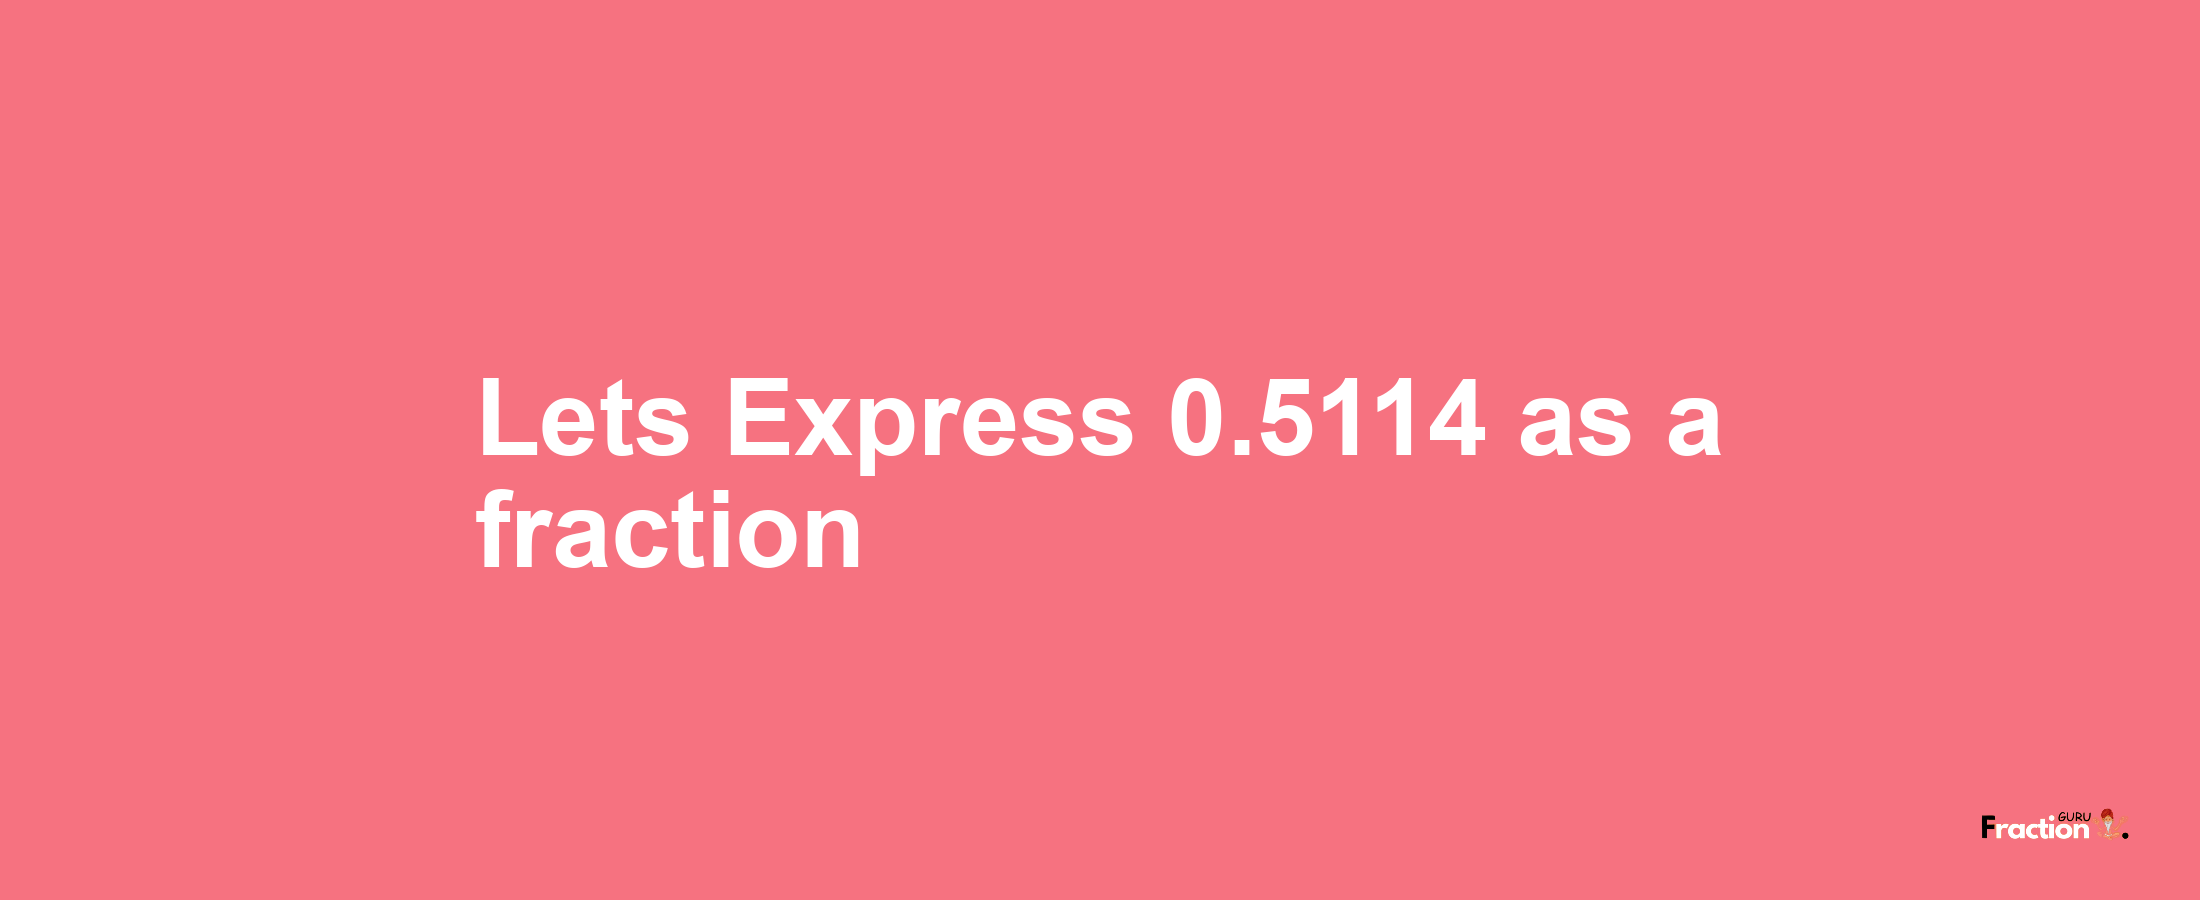 Lets Express 0.5114 as afraction